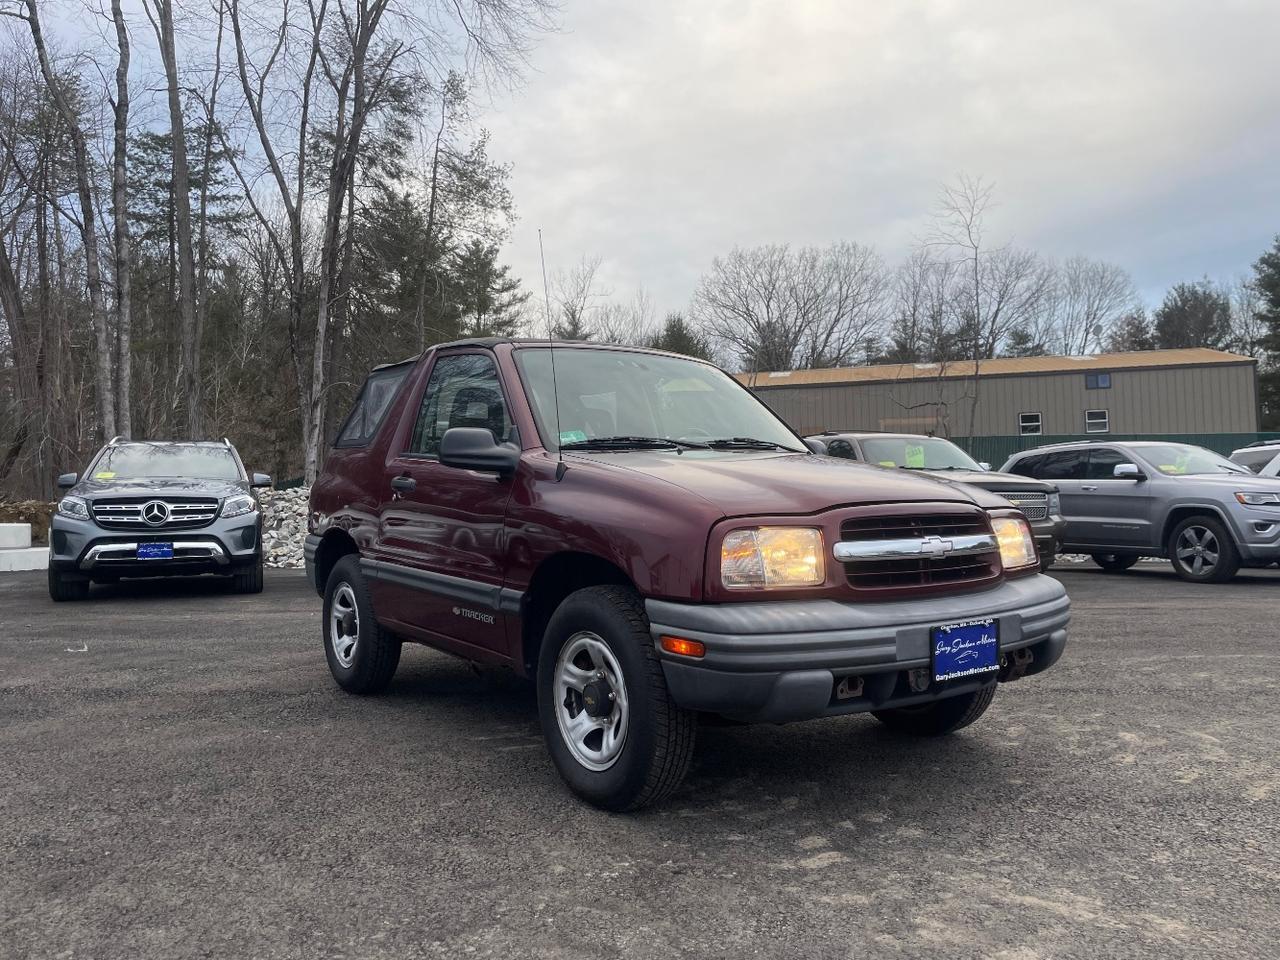 Used 2002 Chevrolet Tracker's nationwide for sale - MotorCloud